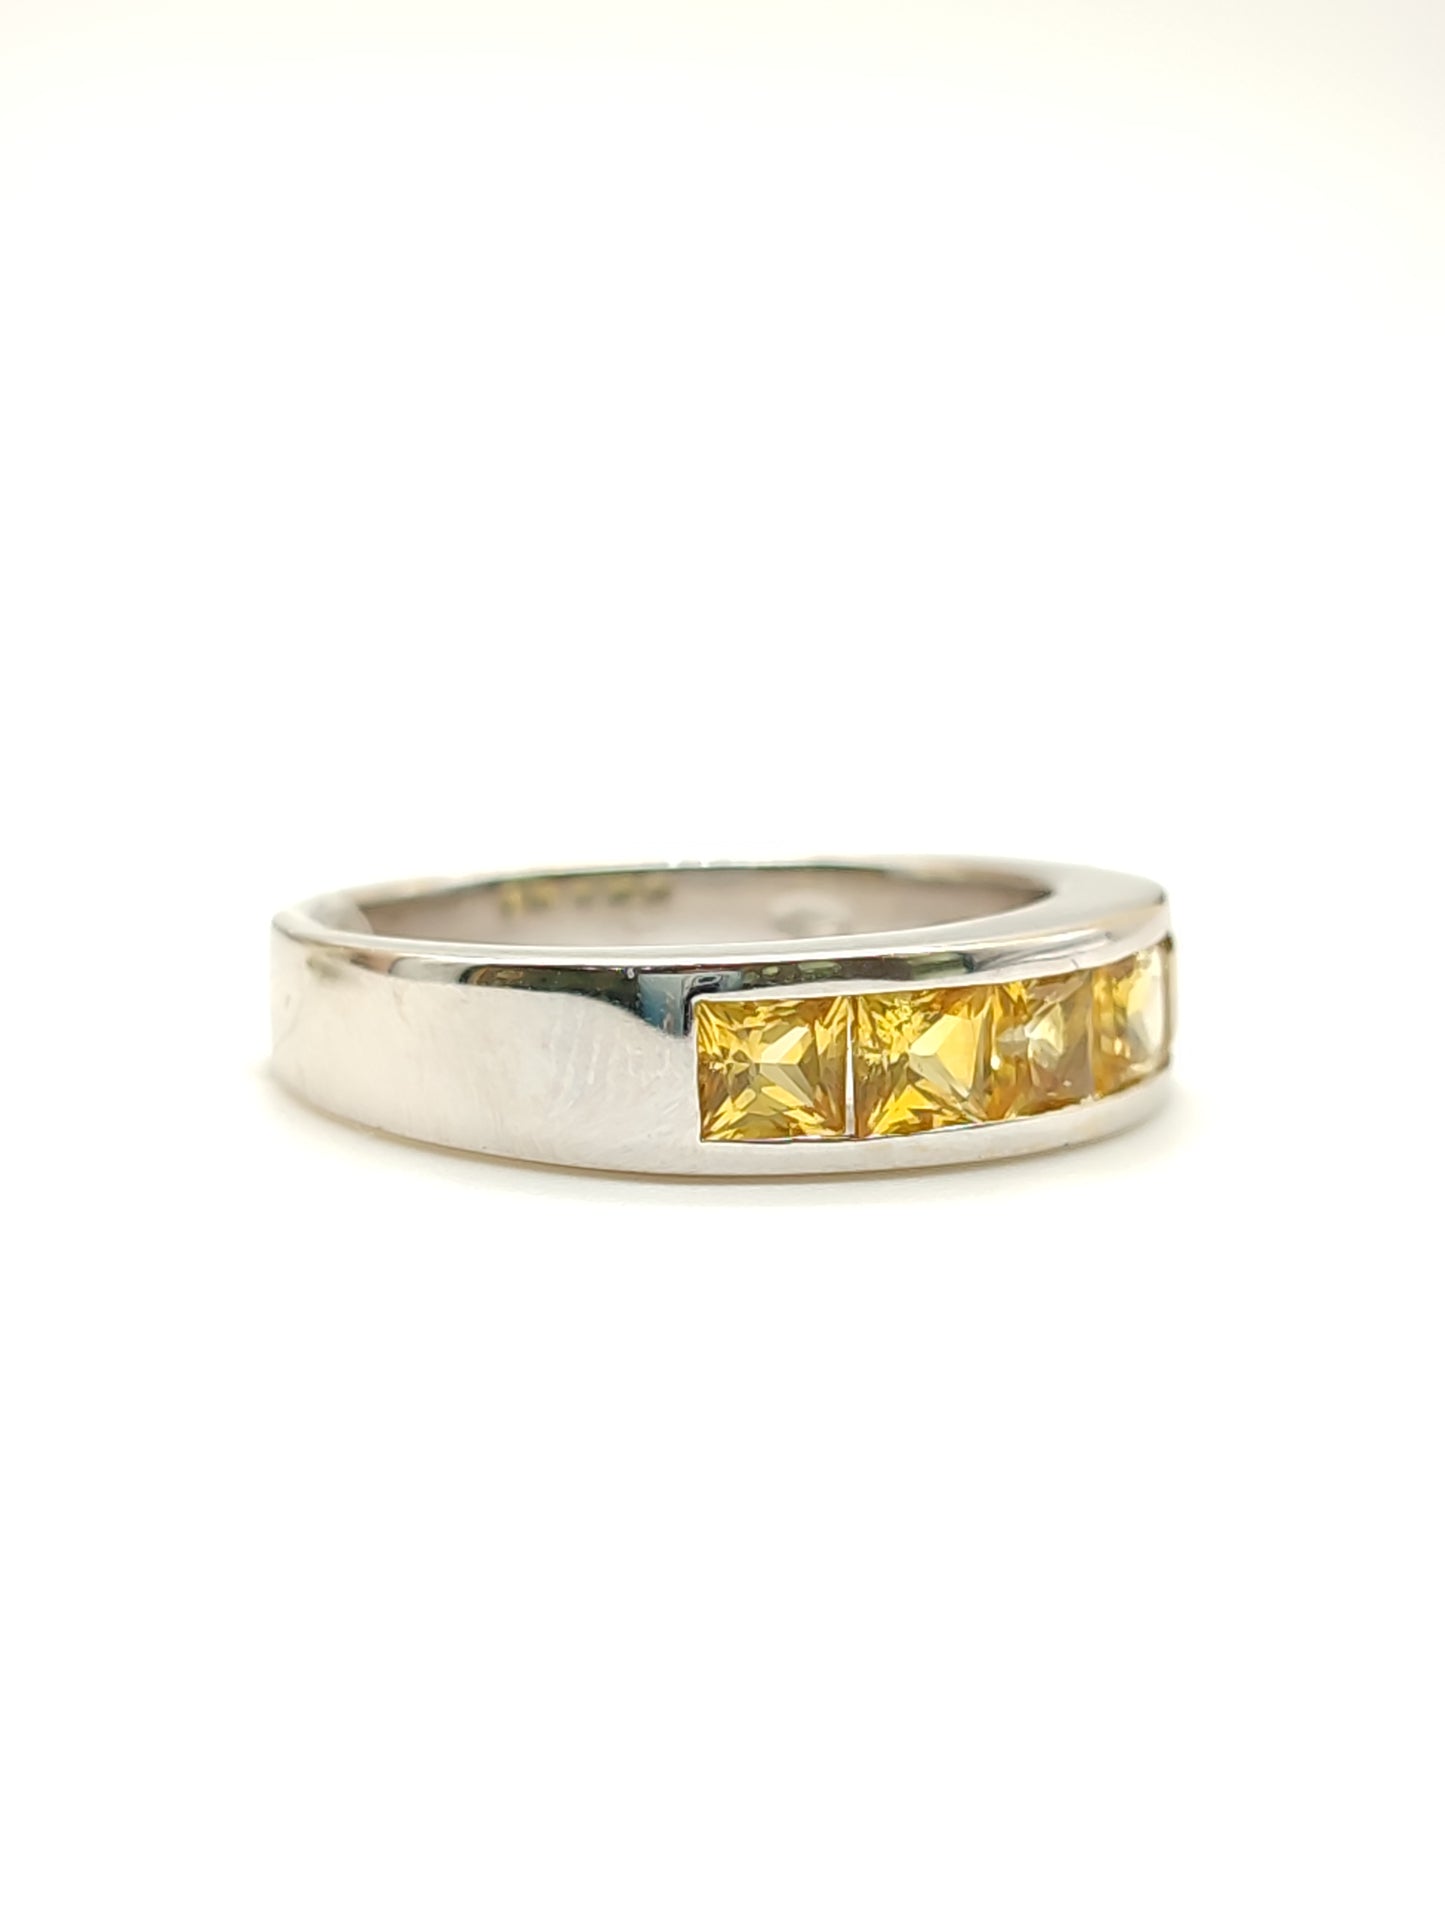 Pavan - Half wedding band in gold with yellow sapphires